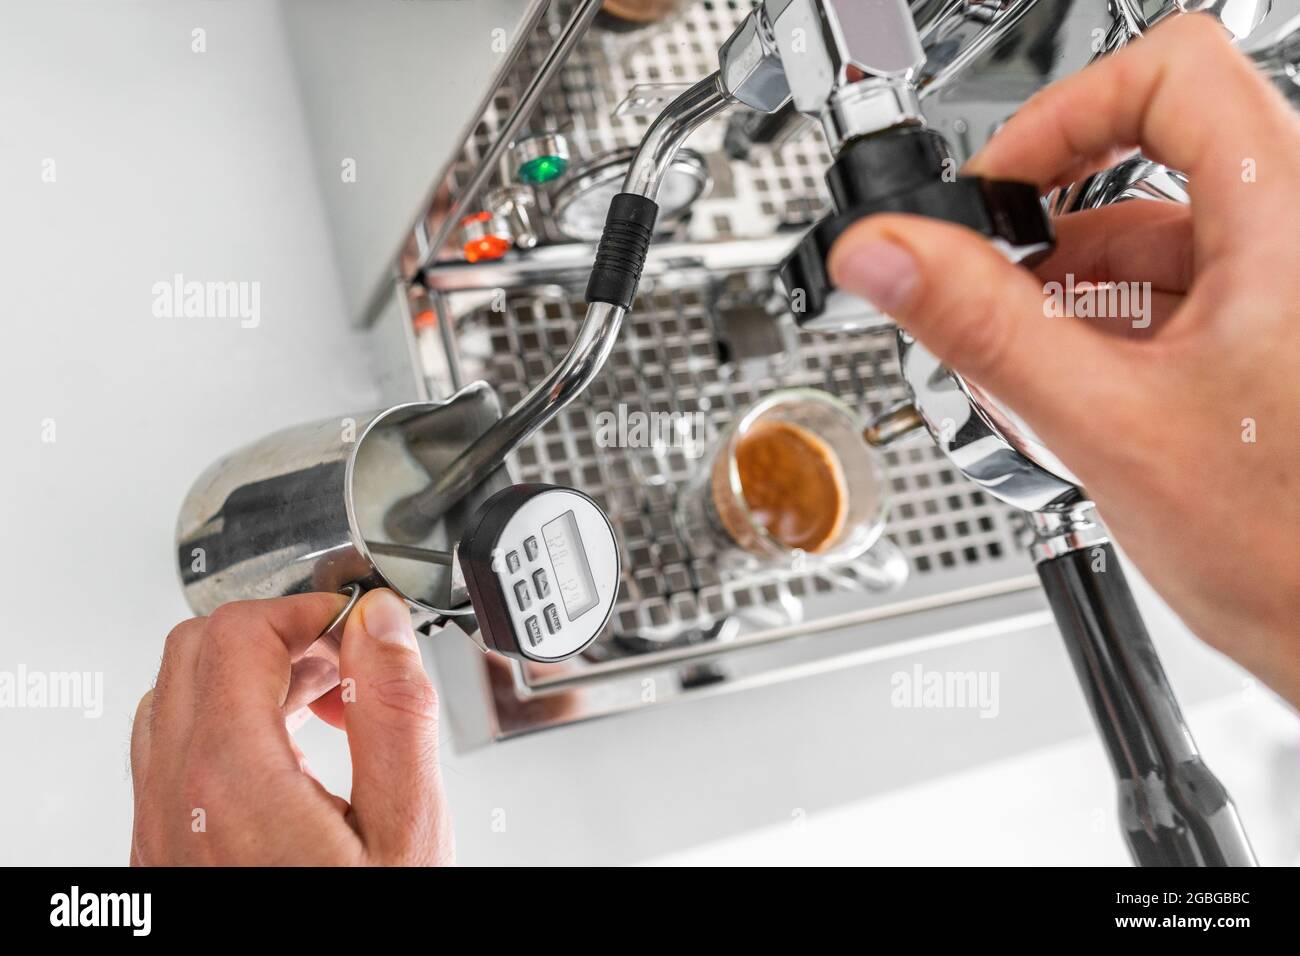 Checking The Heat Of Coffee Using Barista Thermometer Stock Photo -  Download Image Now - iStock